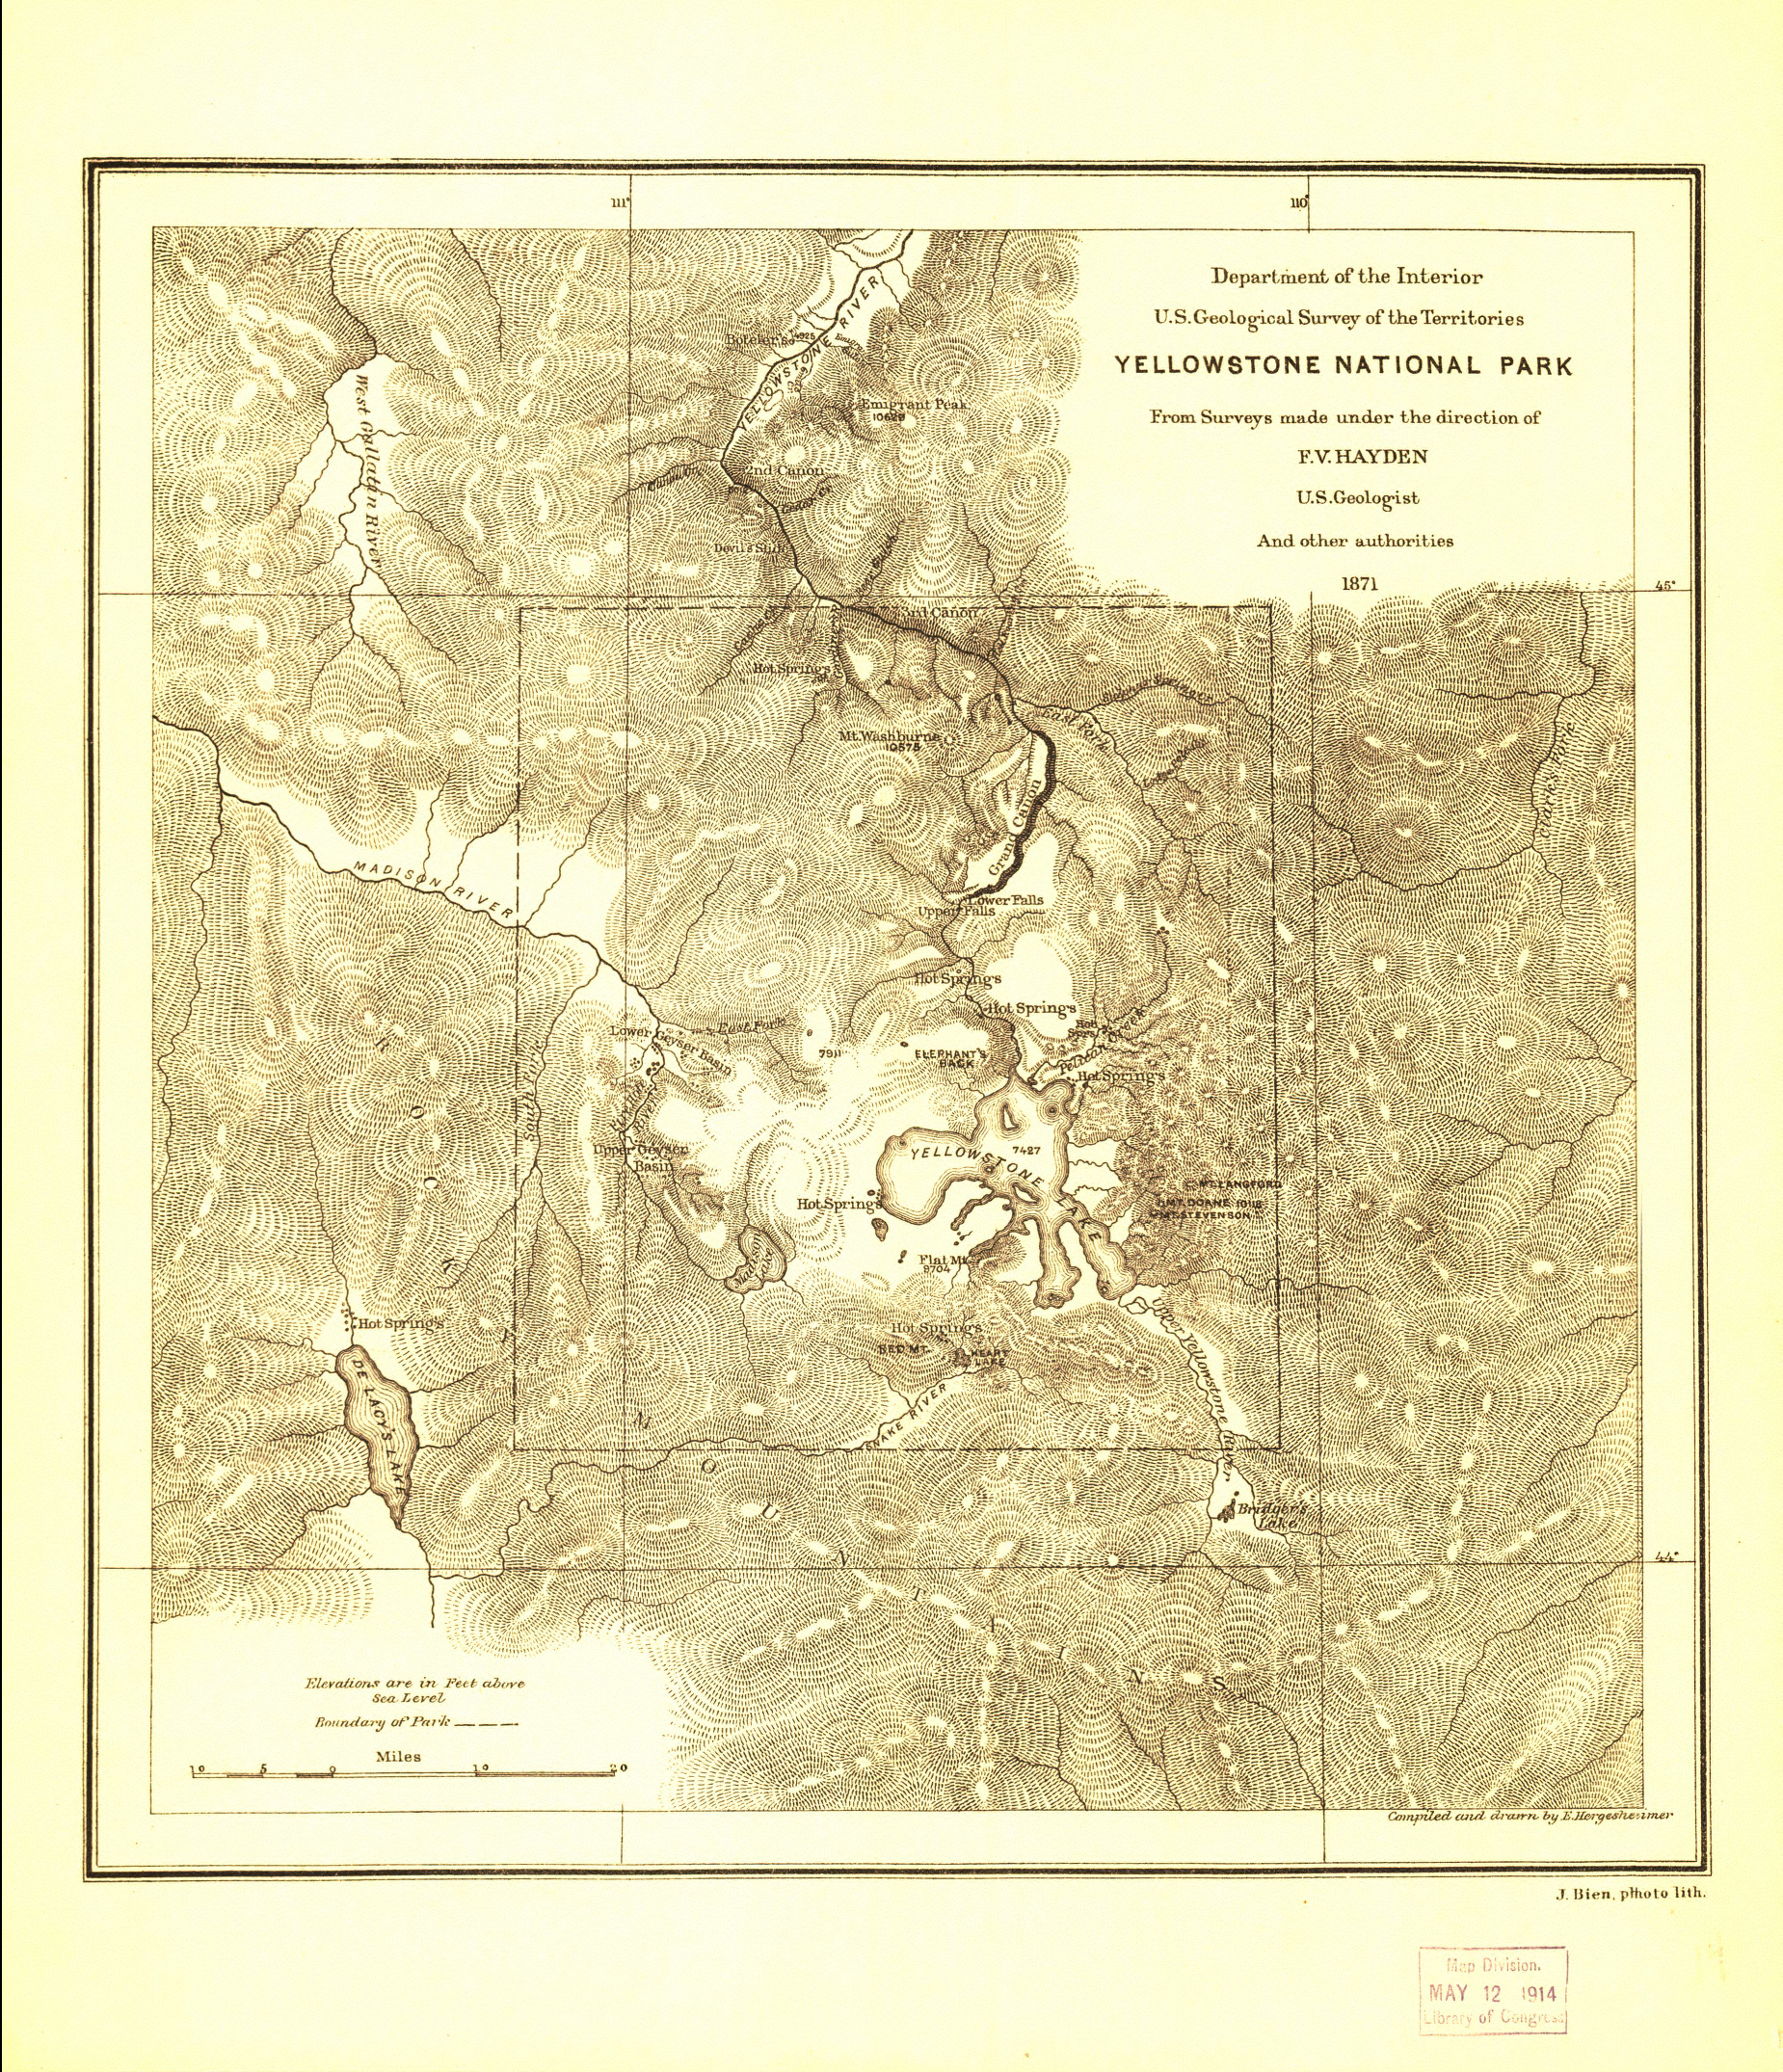 Yellowstone National Park 1871 Hayden Map from the Library of Congress Collection